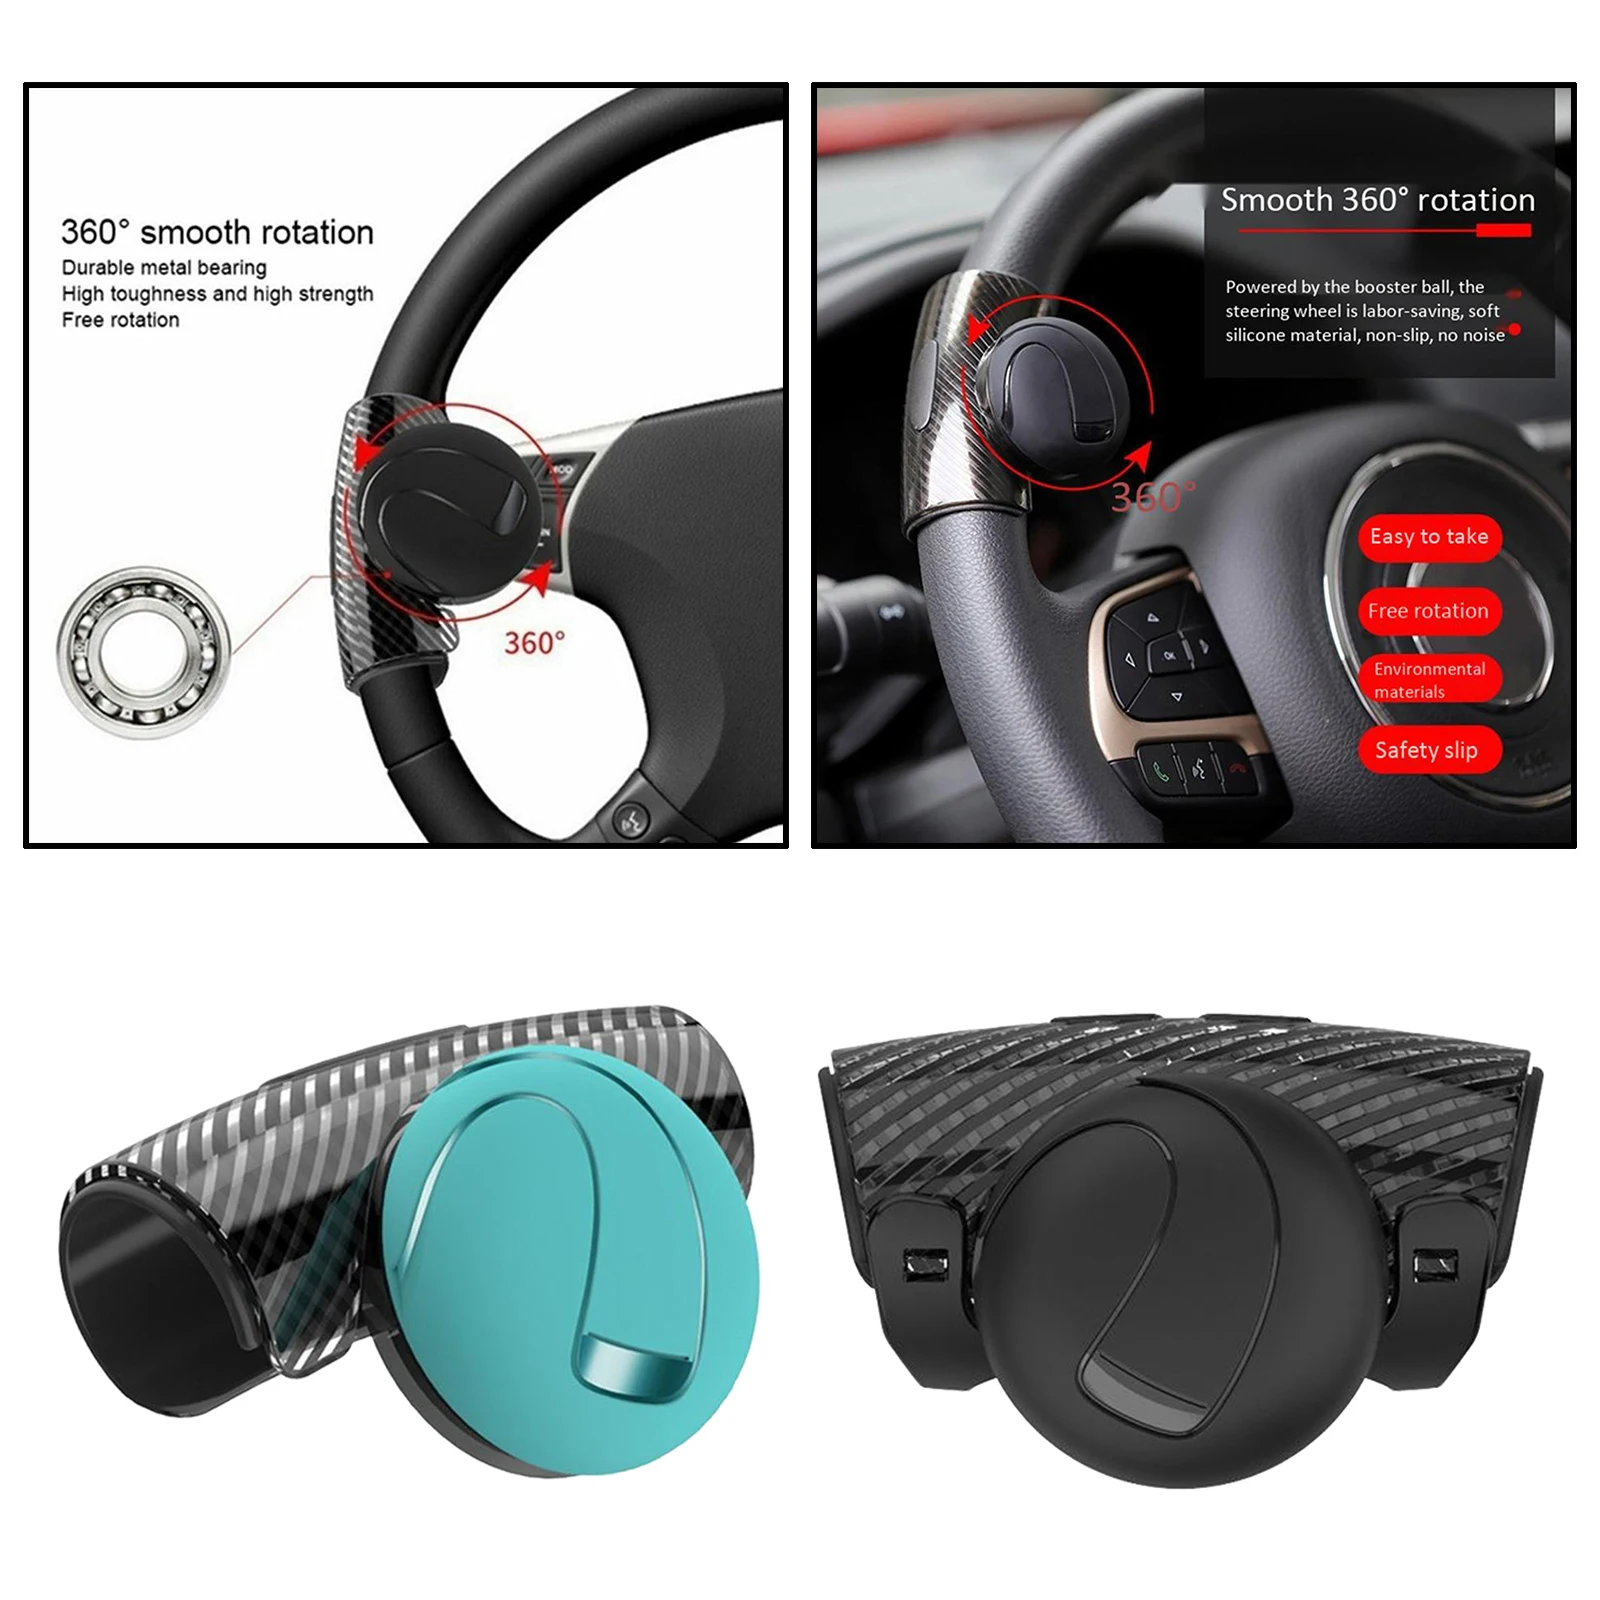 Auto Car Steering Wheel Accessories Spinner Silicone Power Handle Knob Booster Ball, Easy to Operate and Drive